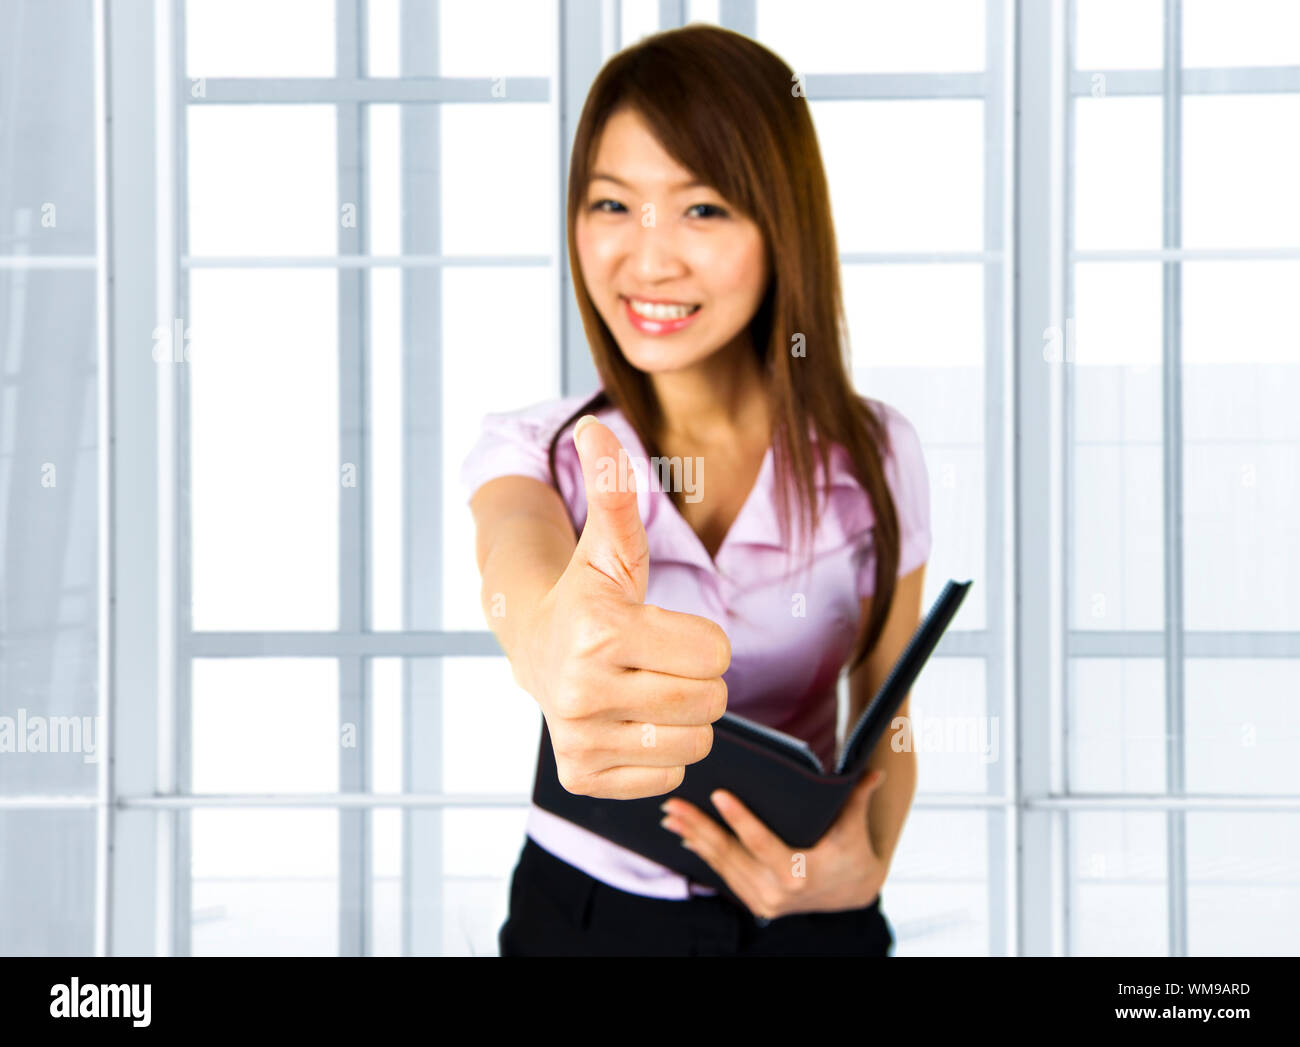 An Asian Girl Giving Thumbs Up Sign And Holding A File In Office